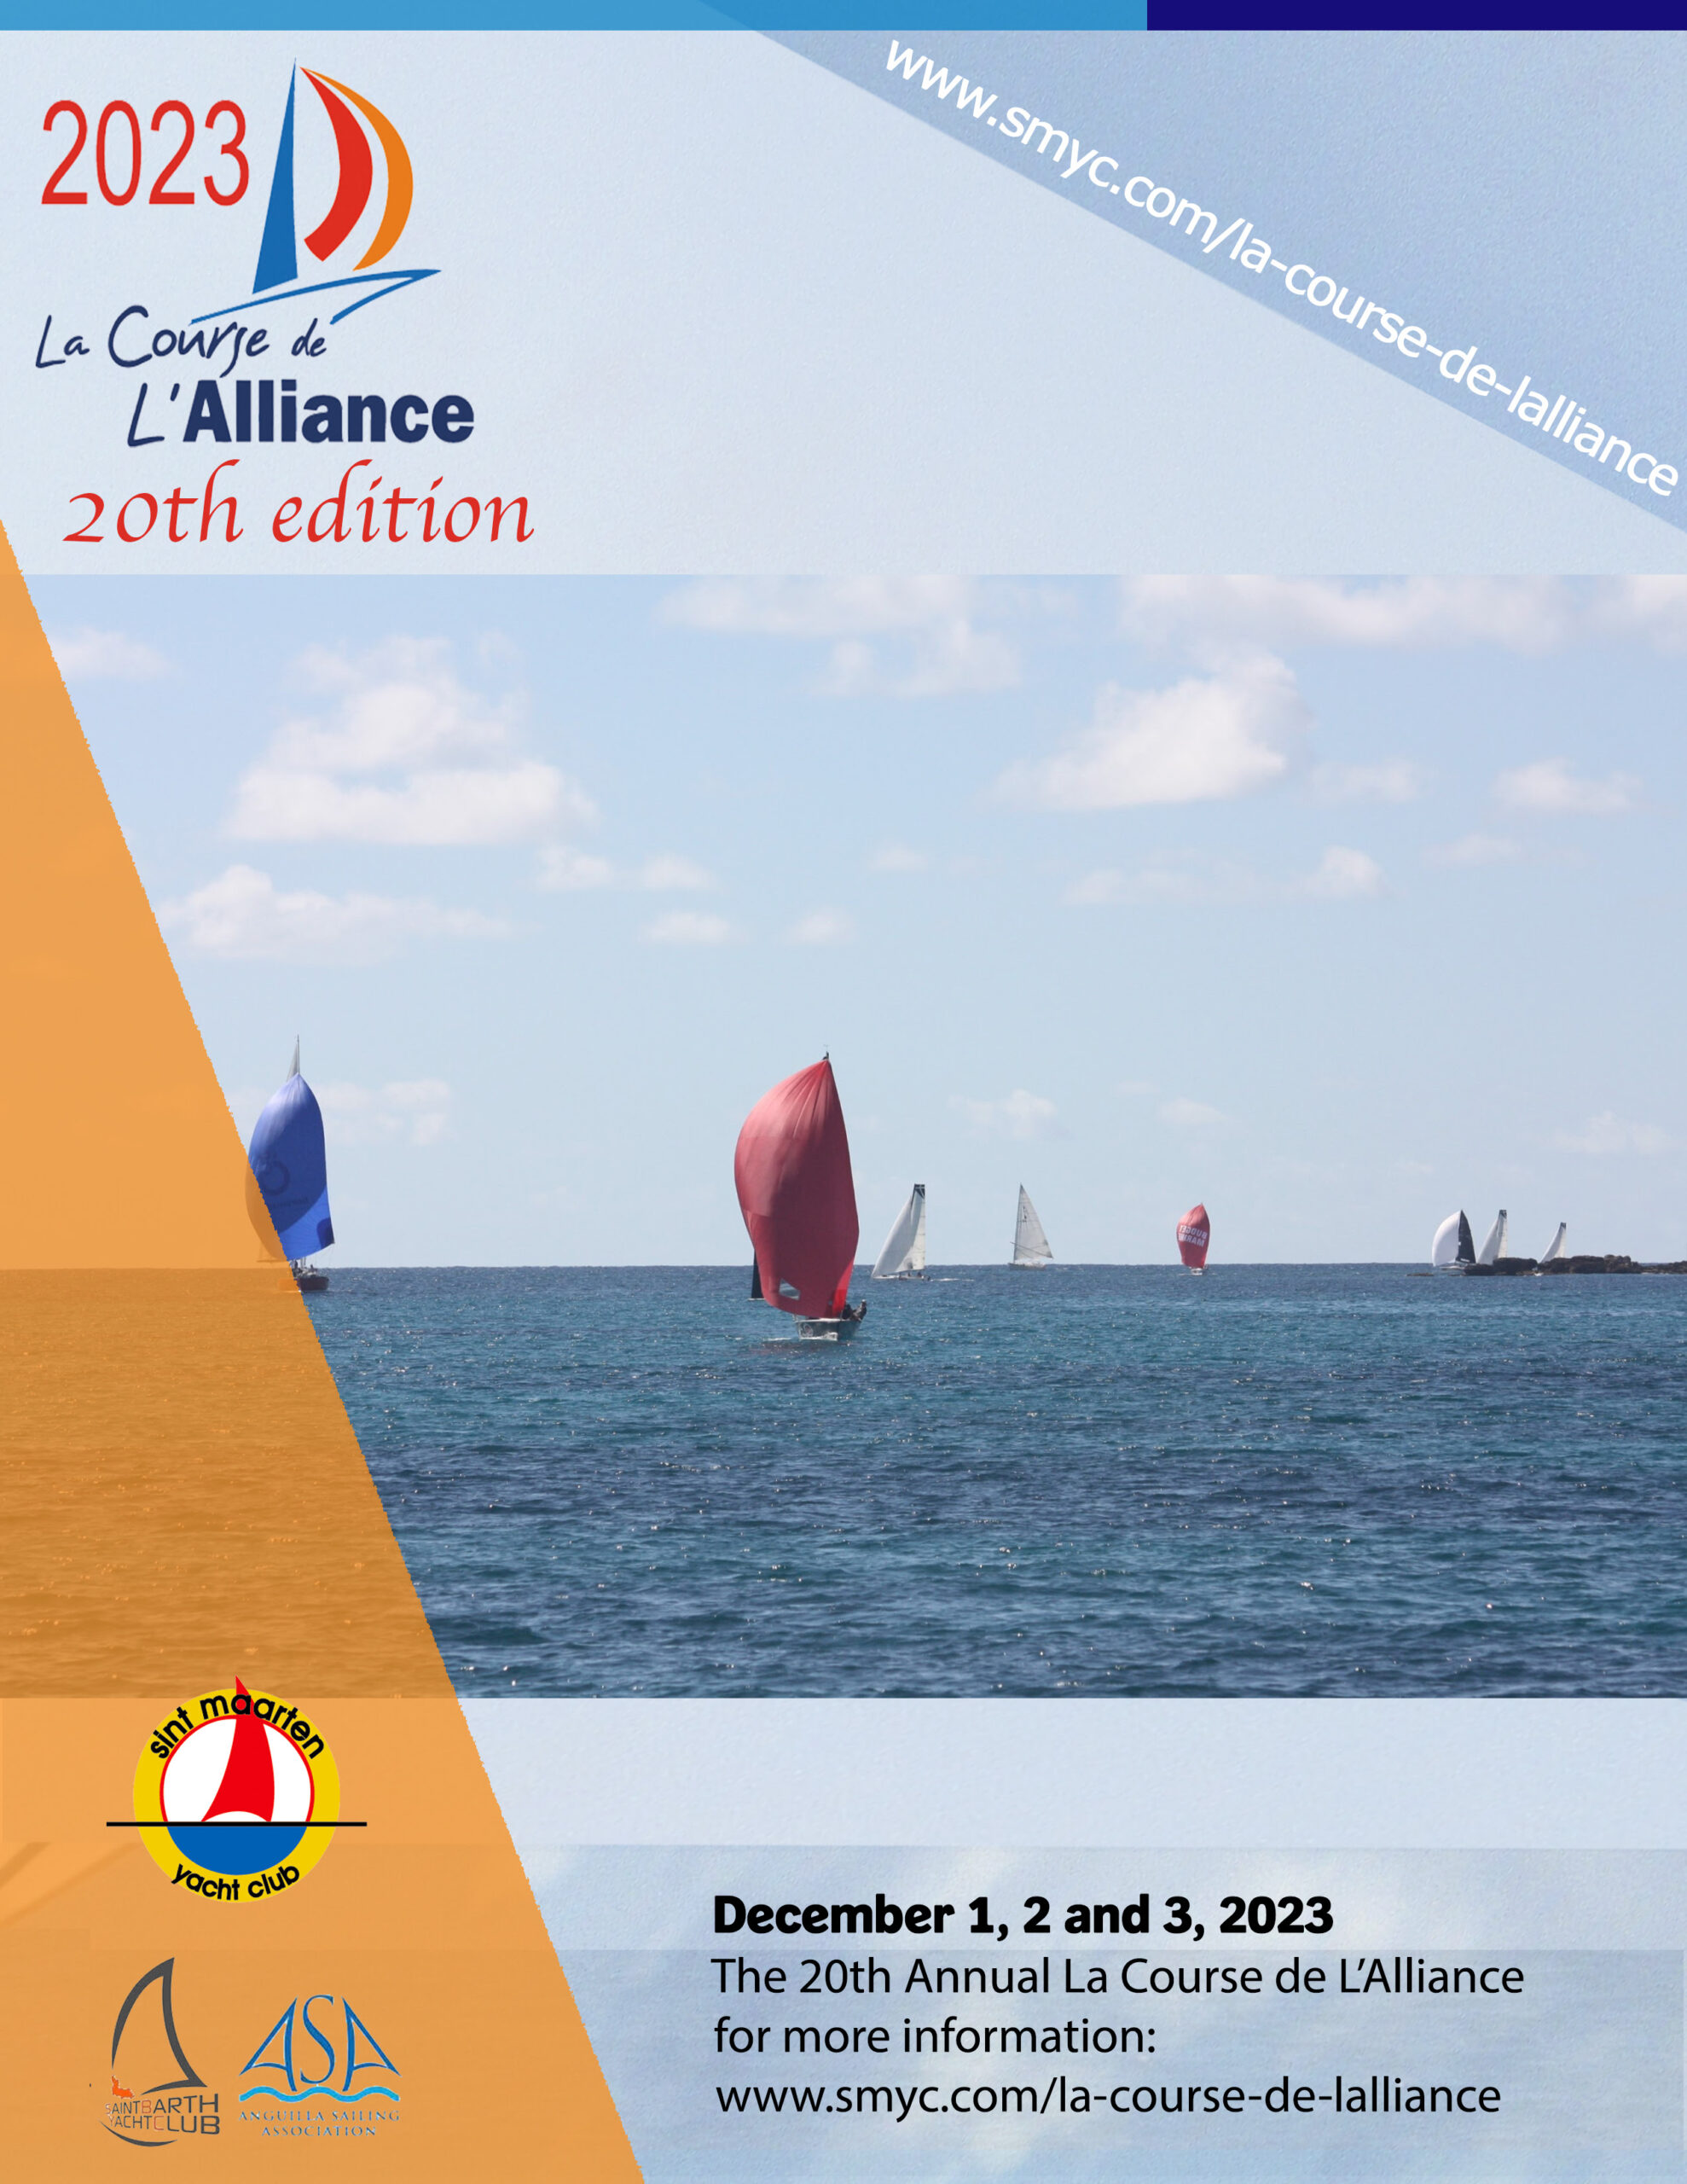 Flyer of the Annual Race of the Course de l'Alliance in December 2023, St Maarten Yacht Club